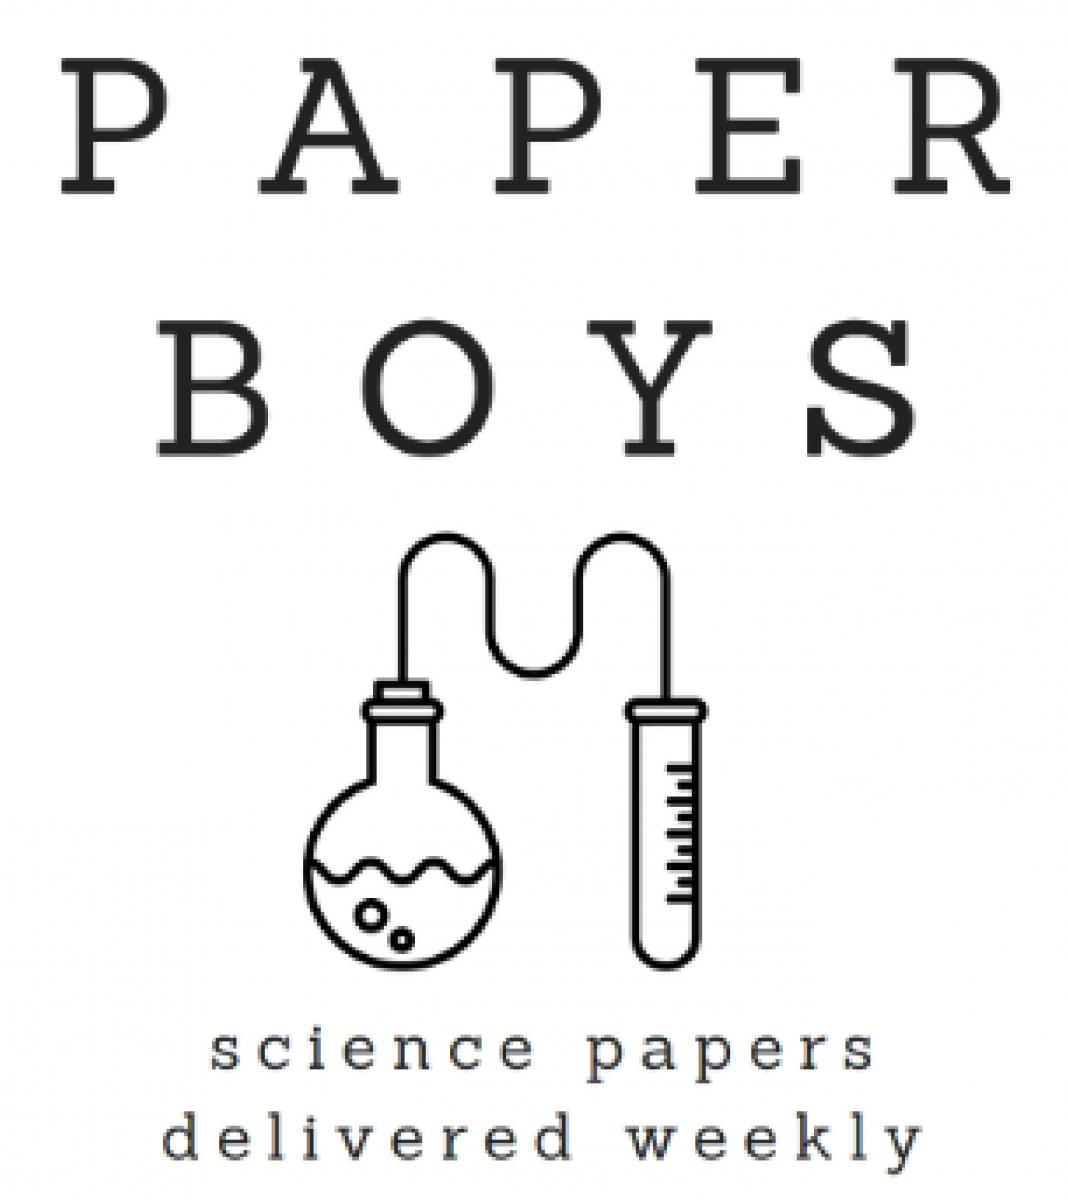 Paper Boys logo "Science papers delivered weekly"